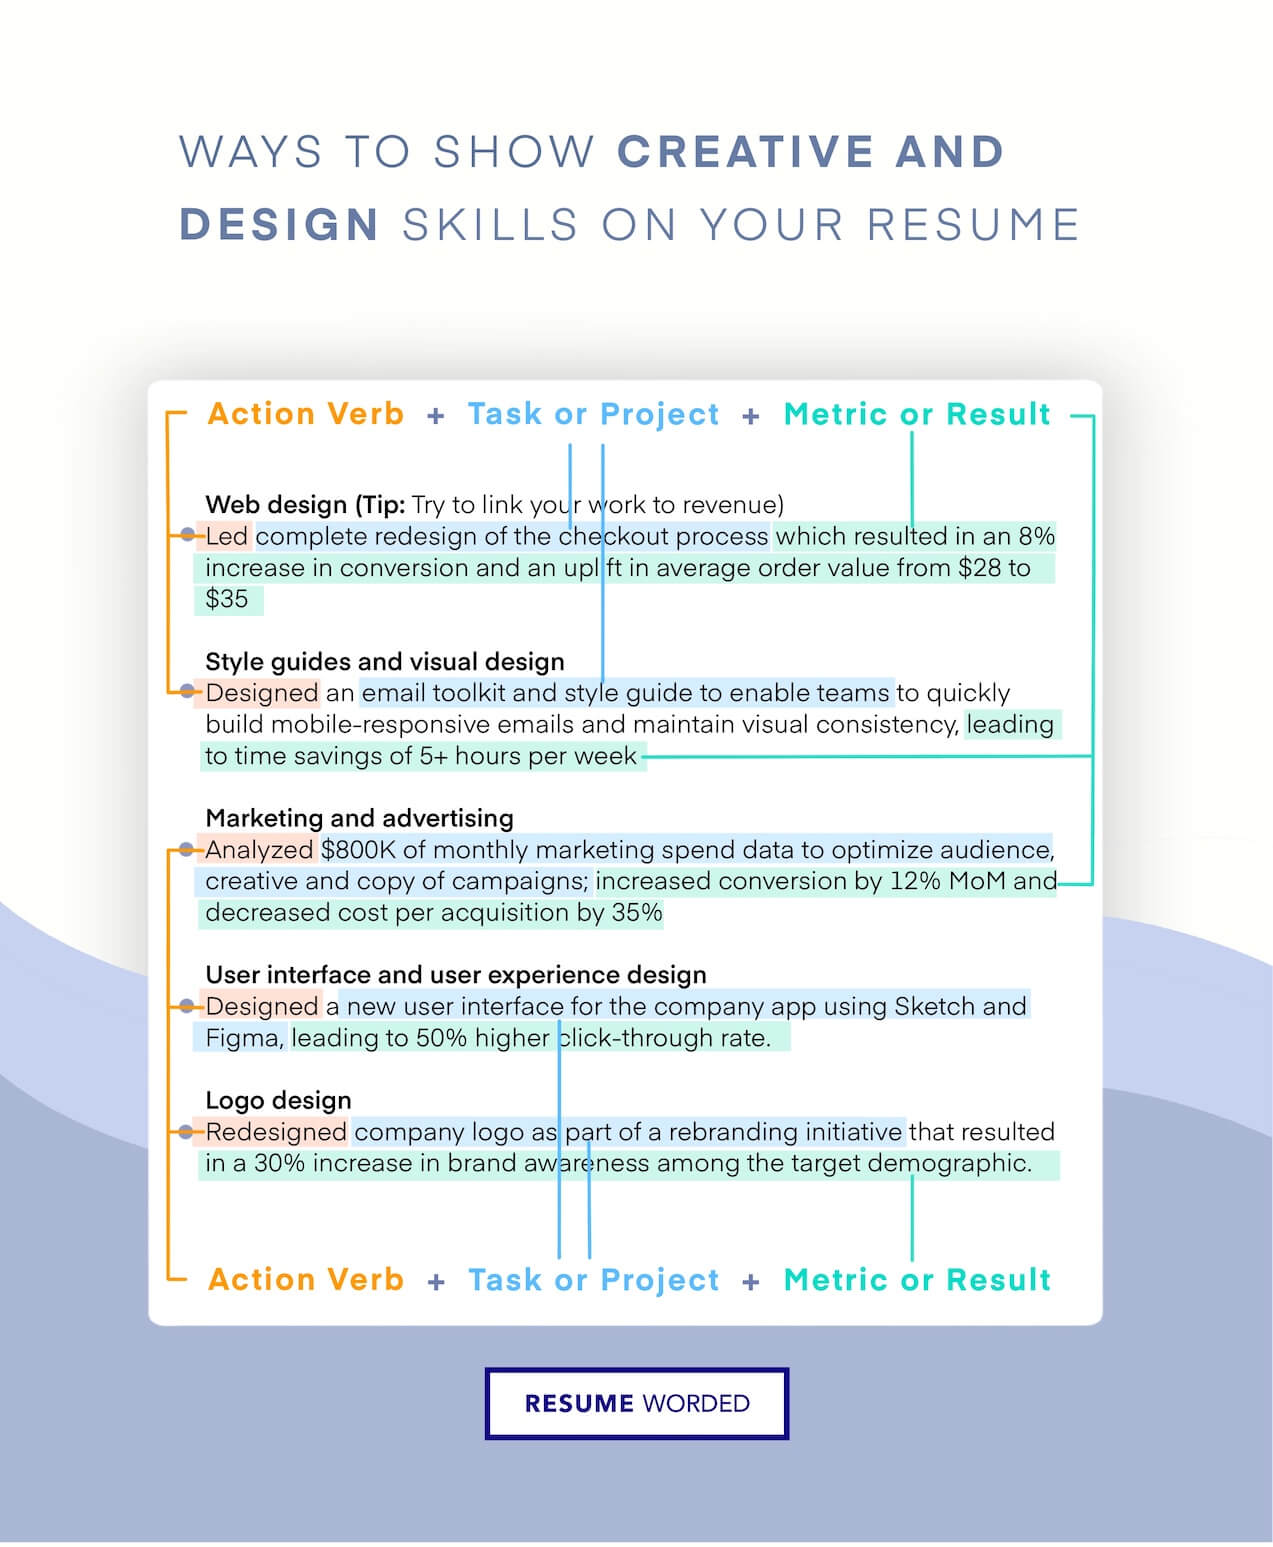 Gain hands-on experience that relates to architectural design - Architectural Designer Resume